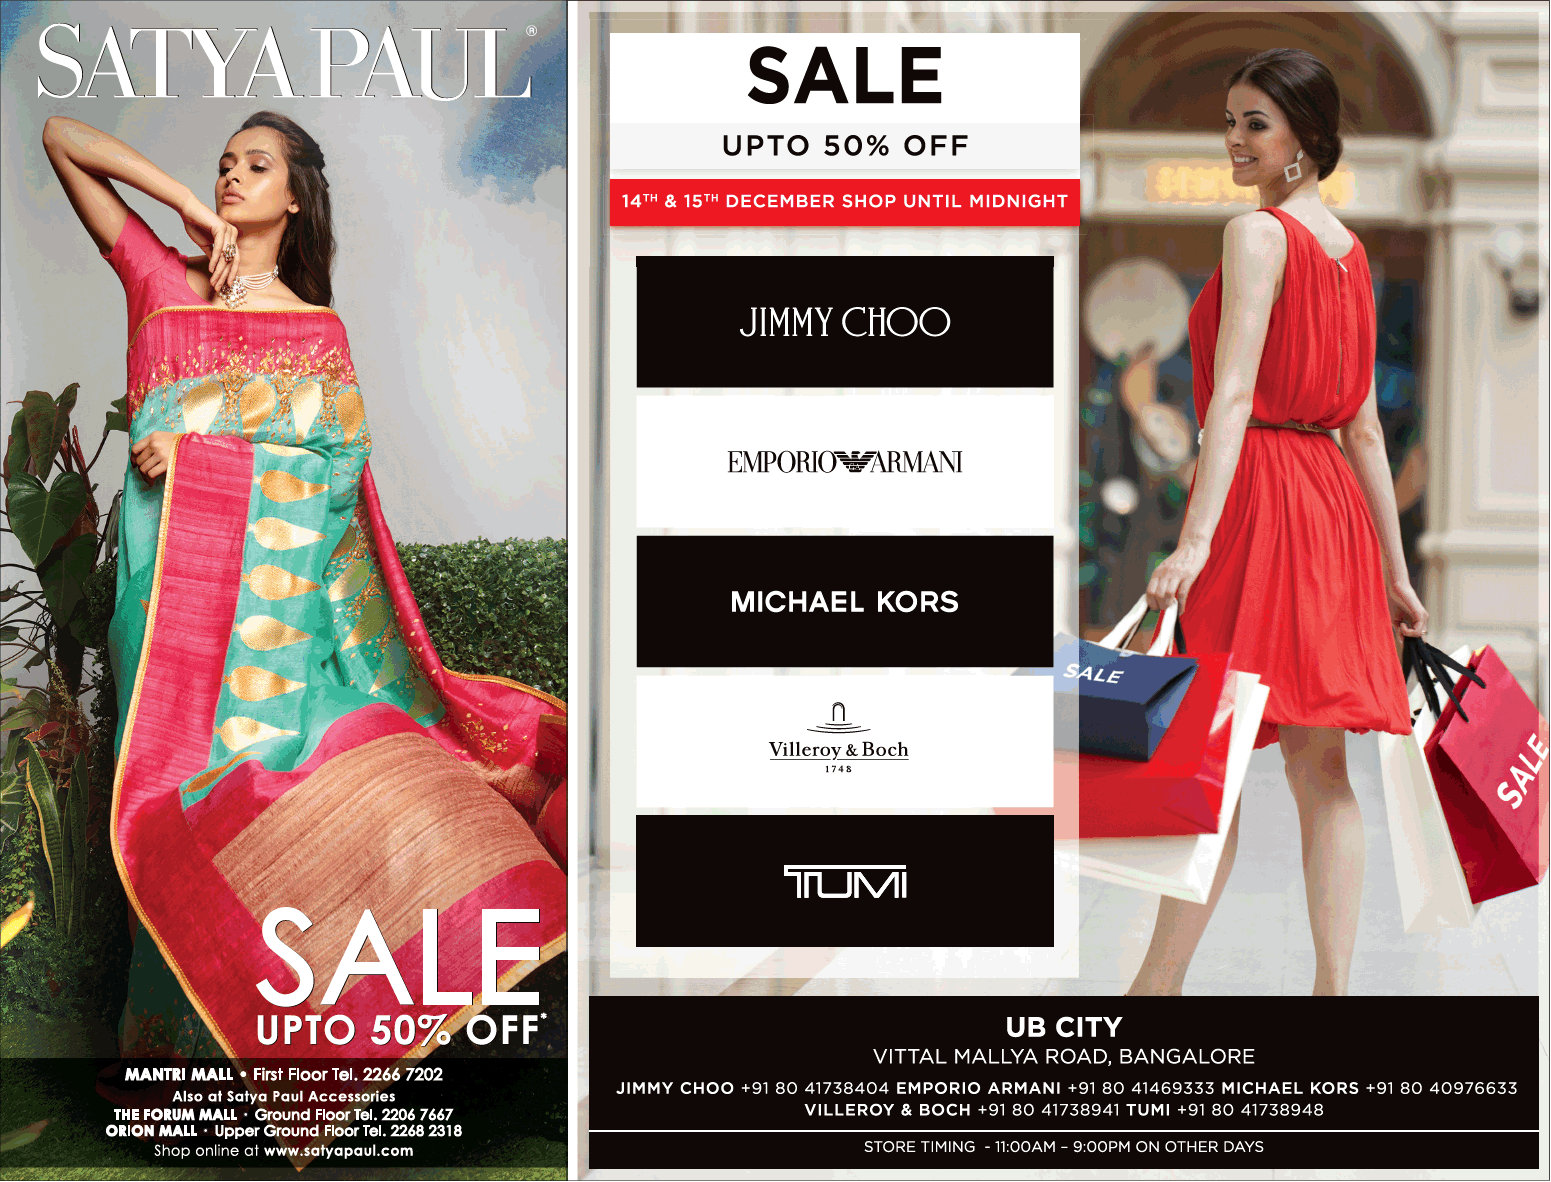 satyapaul-clothing-sale-upto-50%-off-ad-times-of-india-bangalore-14-12-2018.png